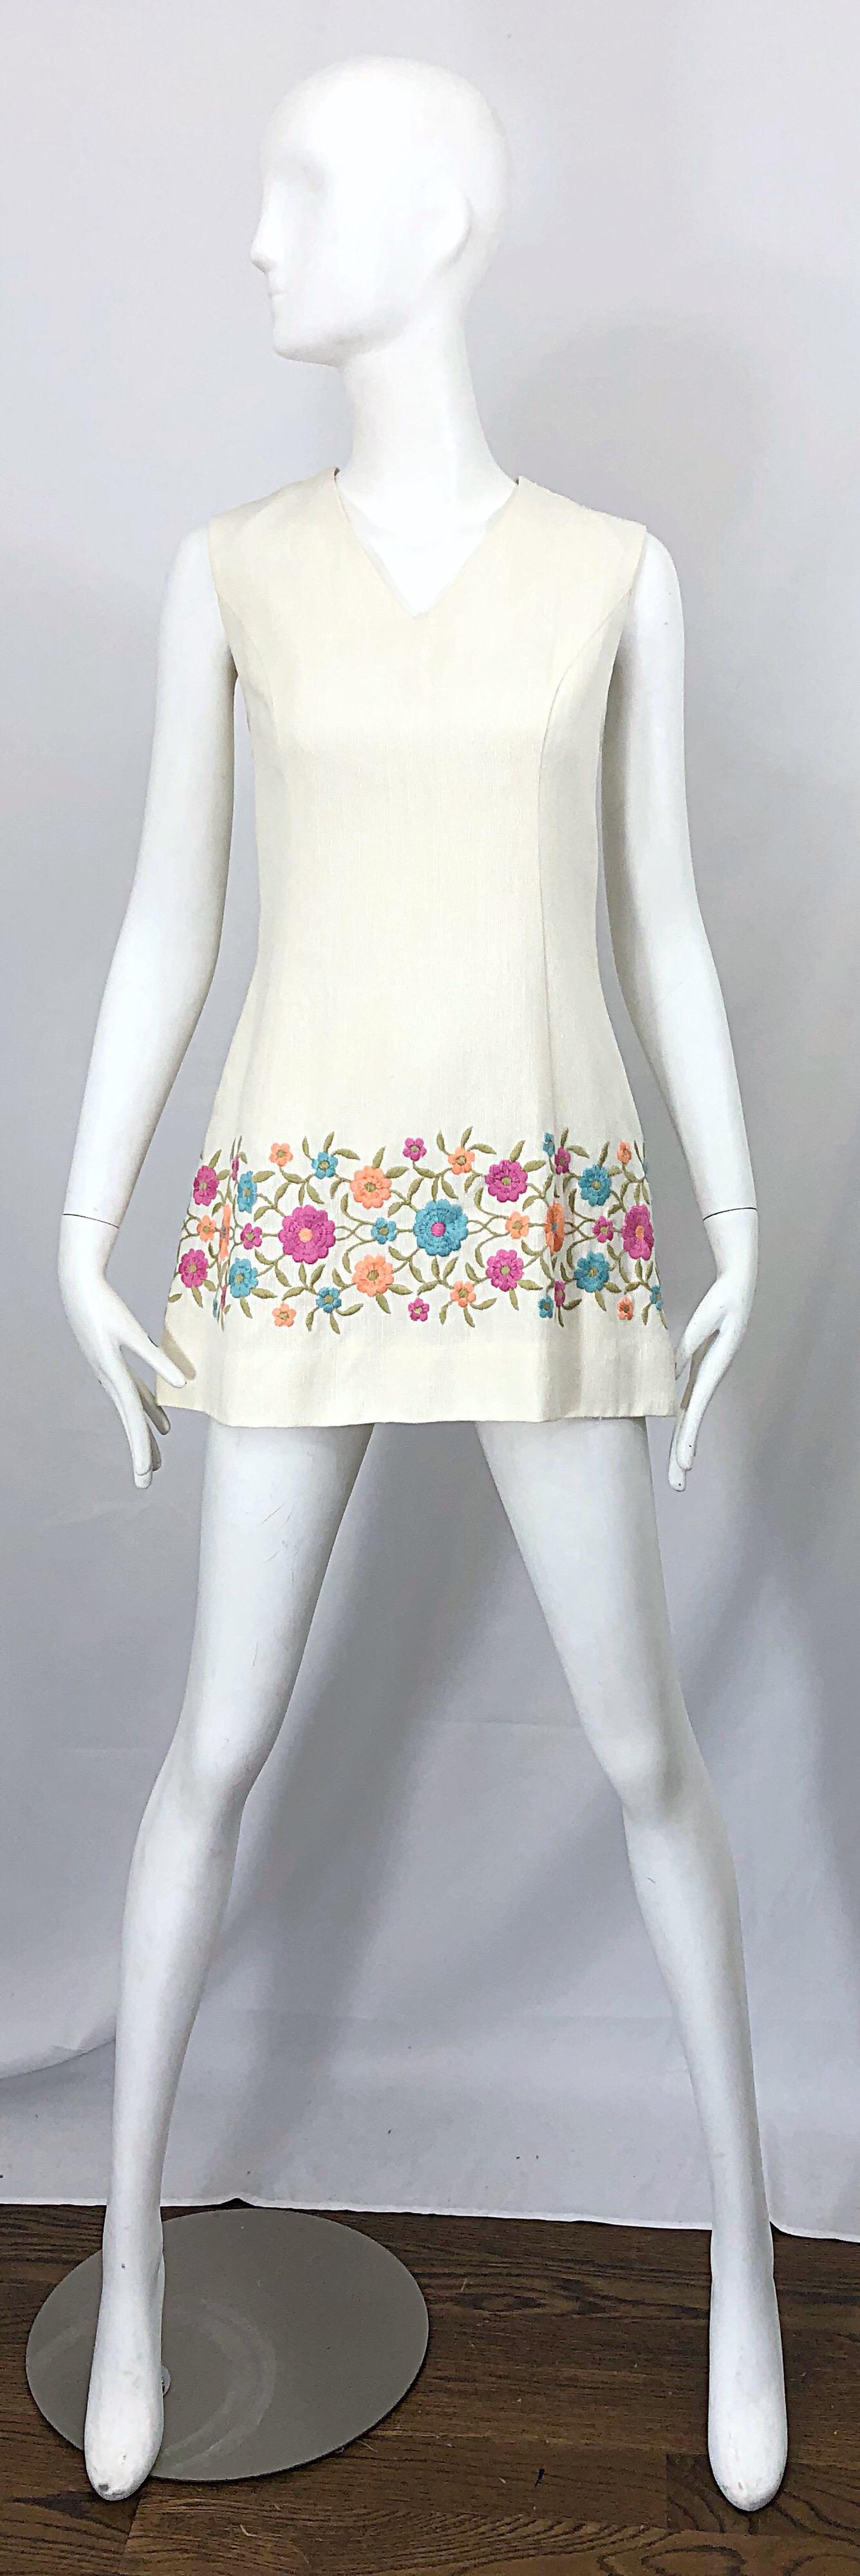 Chic Late 60s Irish Linen A-Line embroidered mini dress / tunic ! Features an ivory / off-white color with pastel pink, blue, and coral flowers embroidered at the hem. V-neck collar fitted bodice with a forgiving flare skirt. Hidden zipper up the